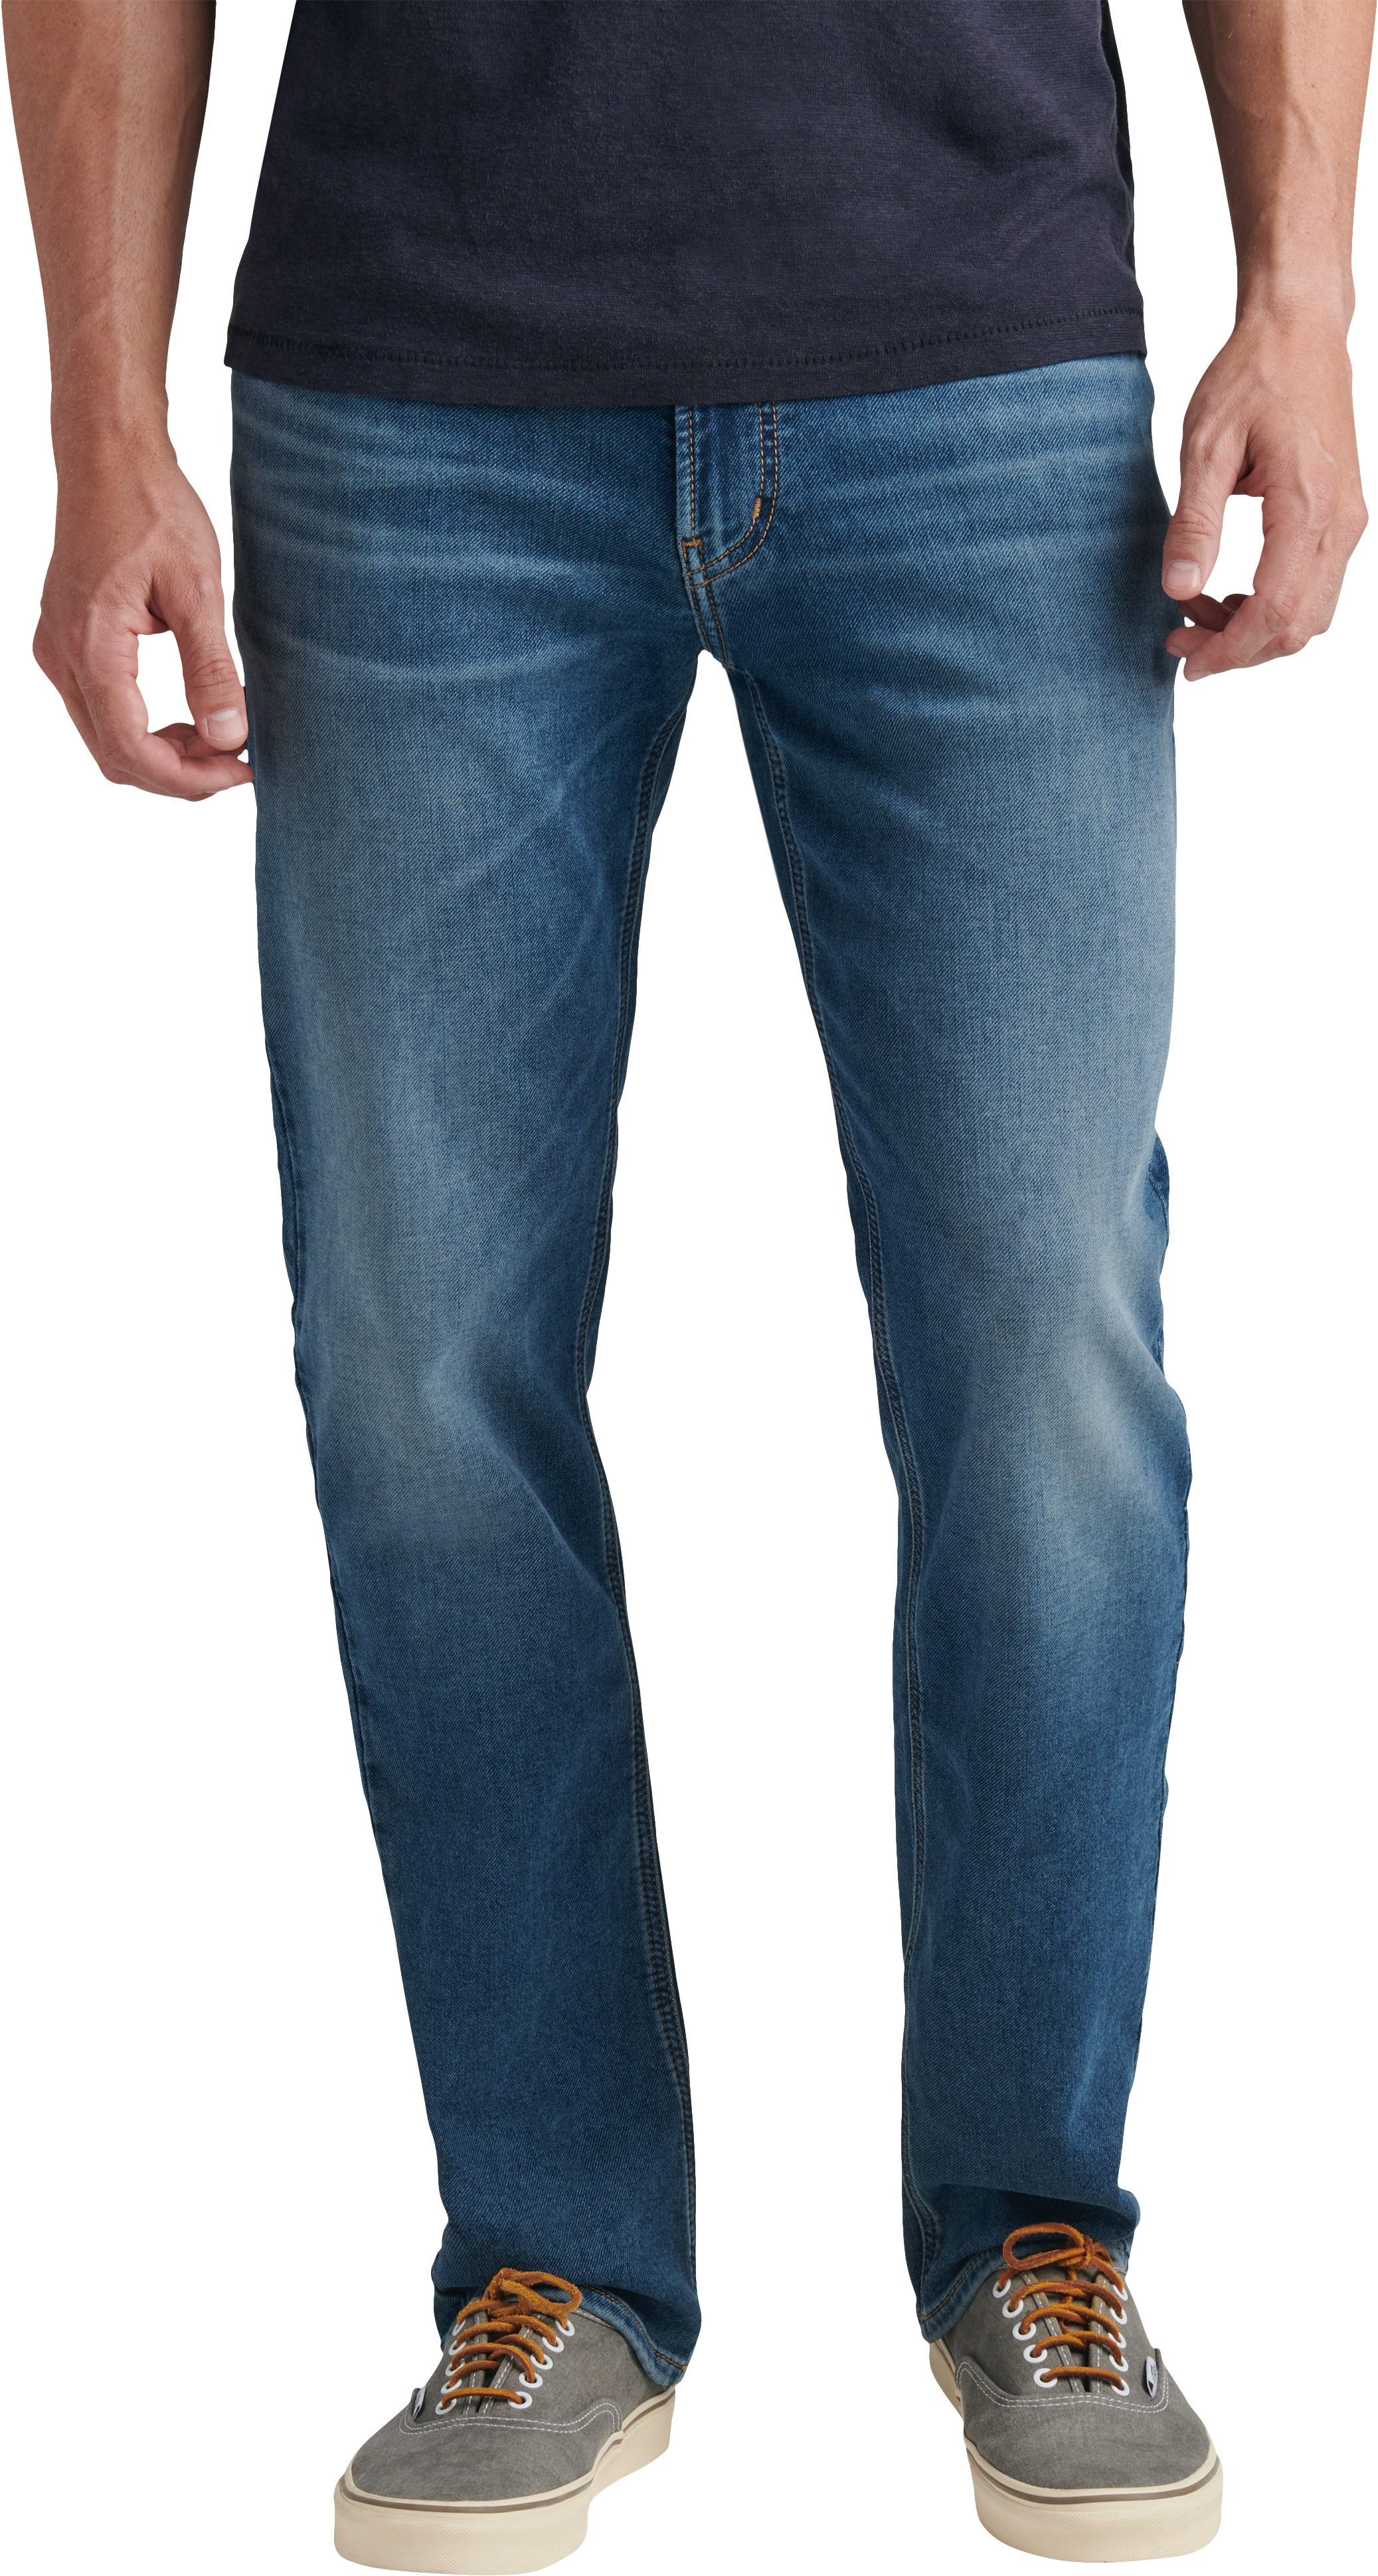 Authentic by Silver Jeans Co. Athletic Fit Jeans, Medium Blue Wash ...